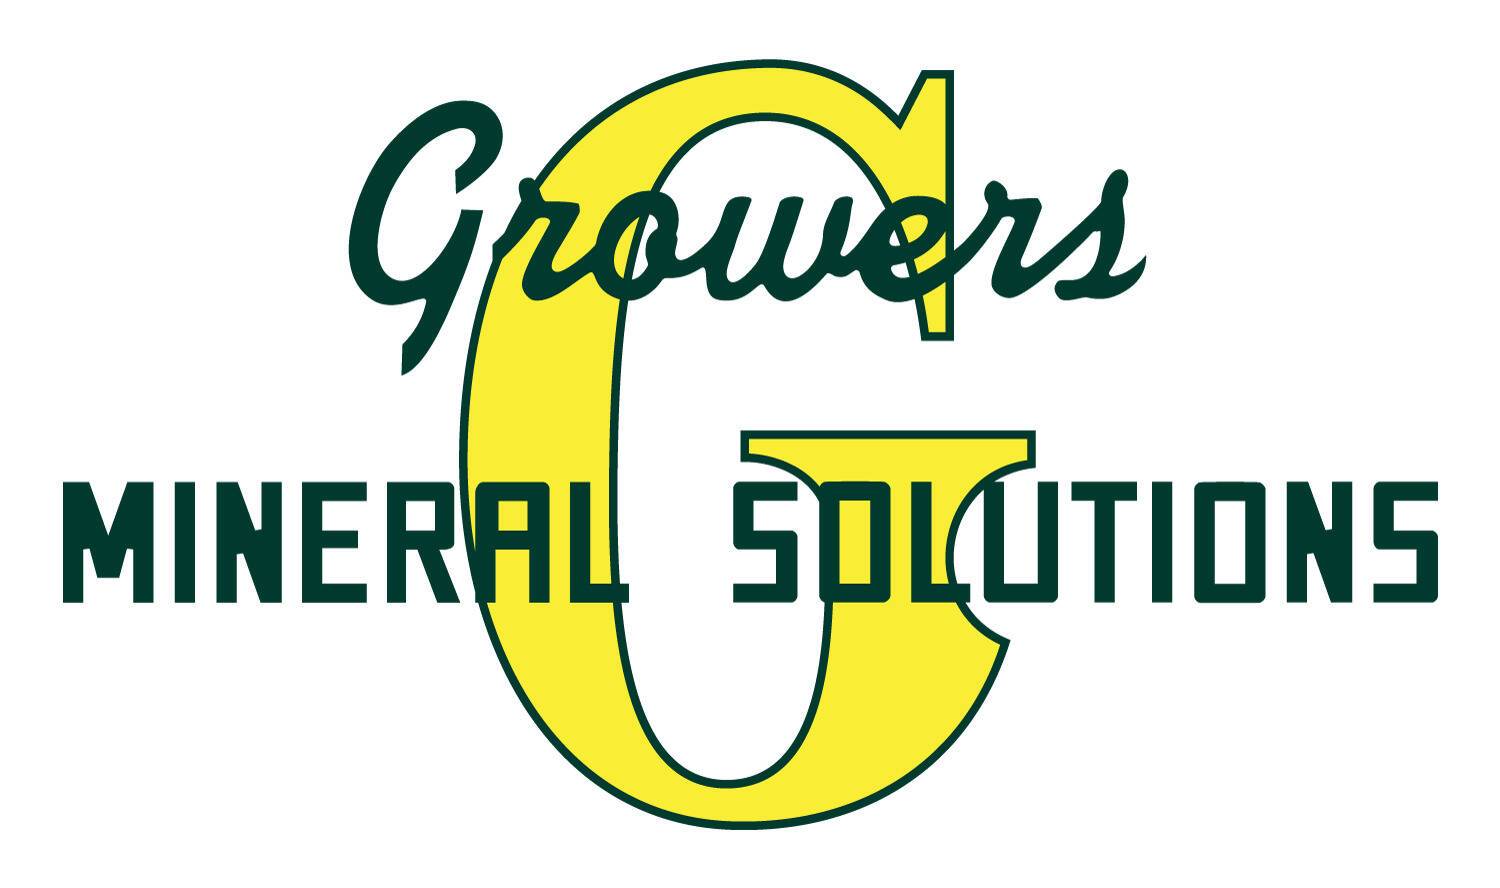 Growers Mineral